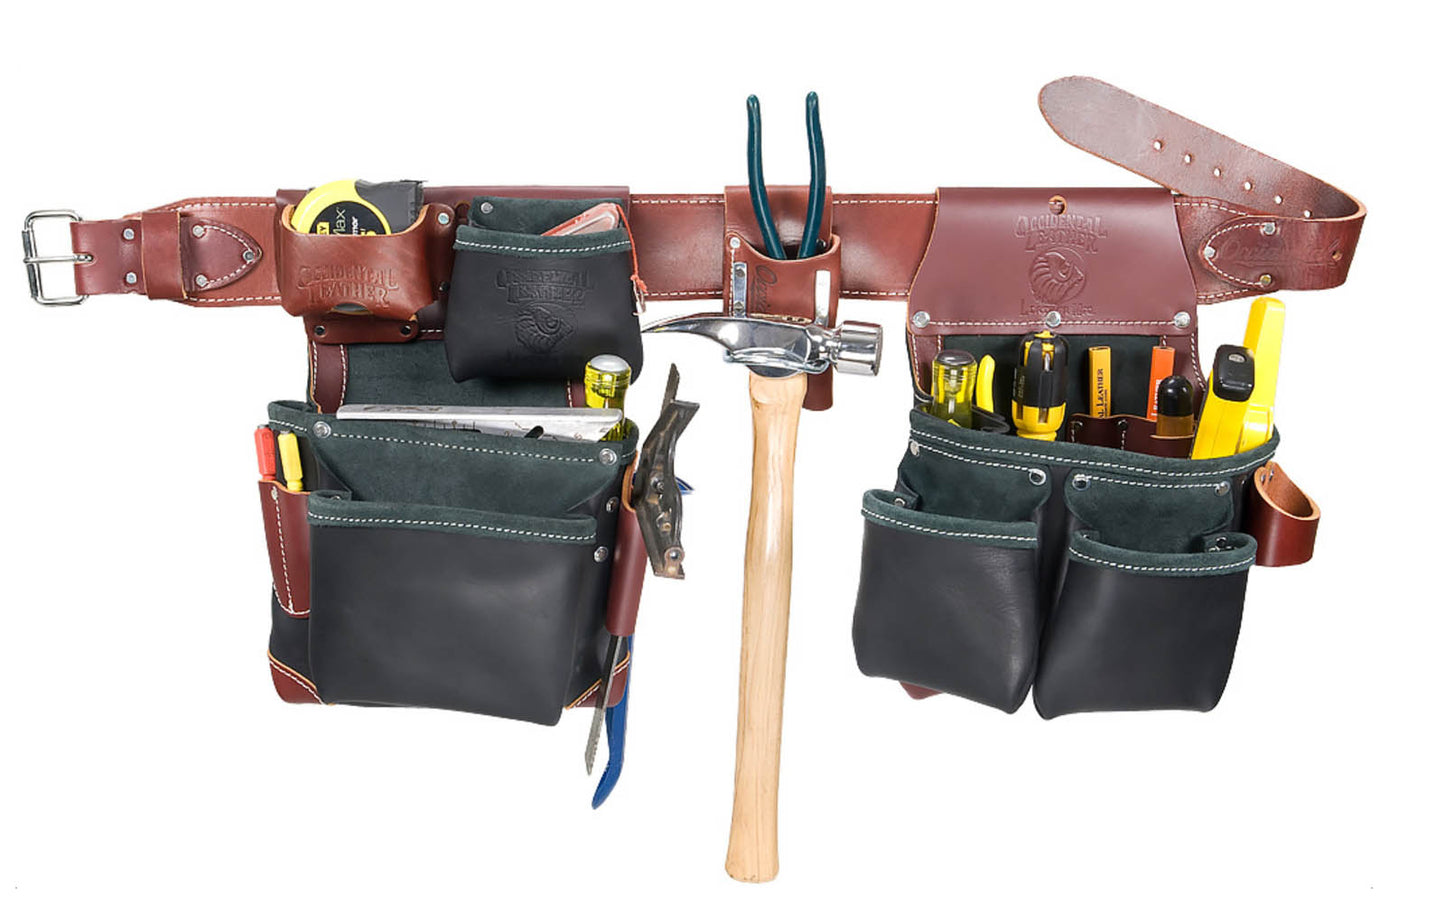 Occidental Leather "Green Building" Tool Belt Set - Black ~ B5625 M - Medium Belt Size (3" Medium Ranger Work Belt) - Top-Grain Leather - Green Builders Bag - 24 pockets - 759244219609. Pro Leather series made of premium top grain cow hides tanned with oils & waxes for heavy use. Black Occidental Leather Bags